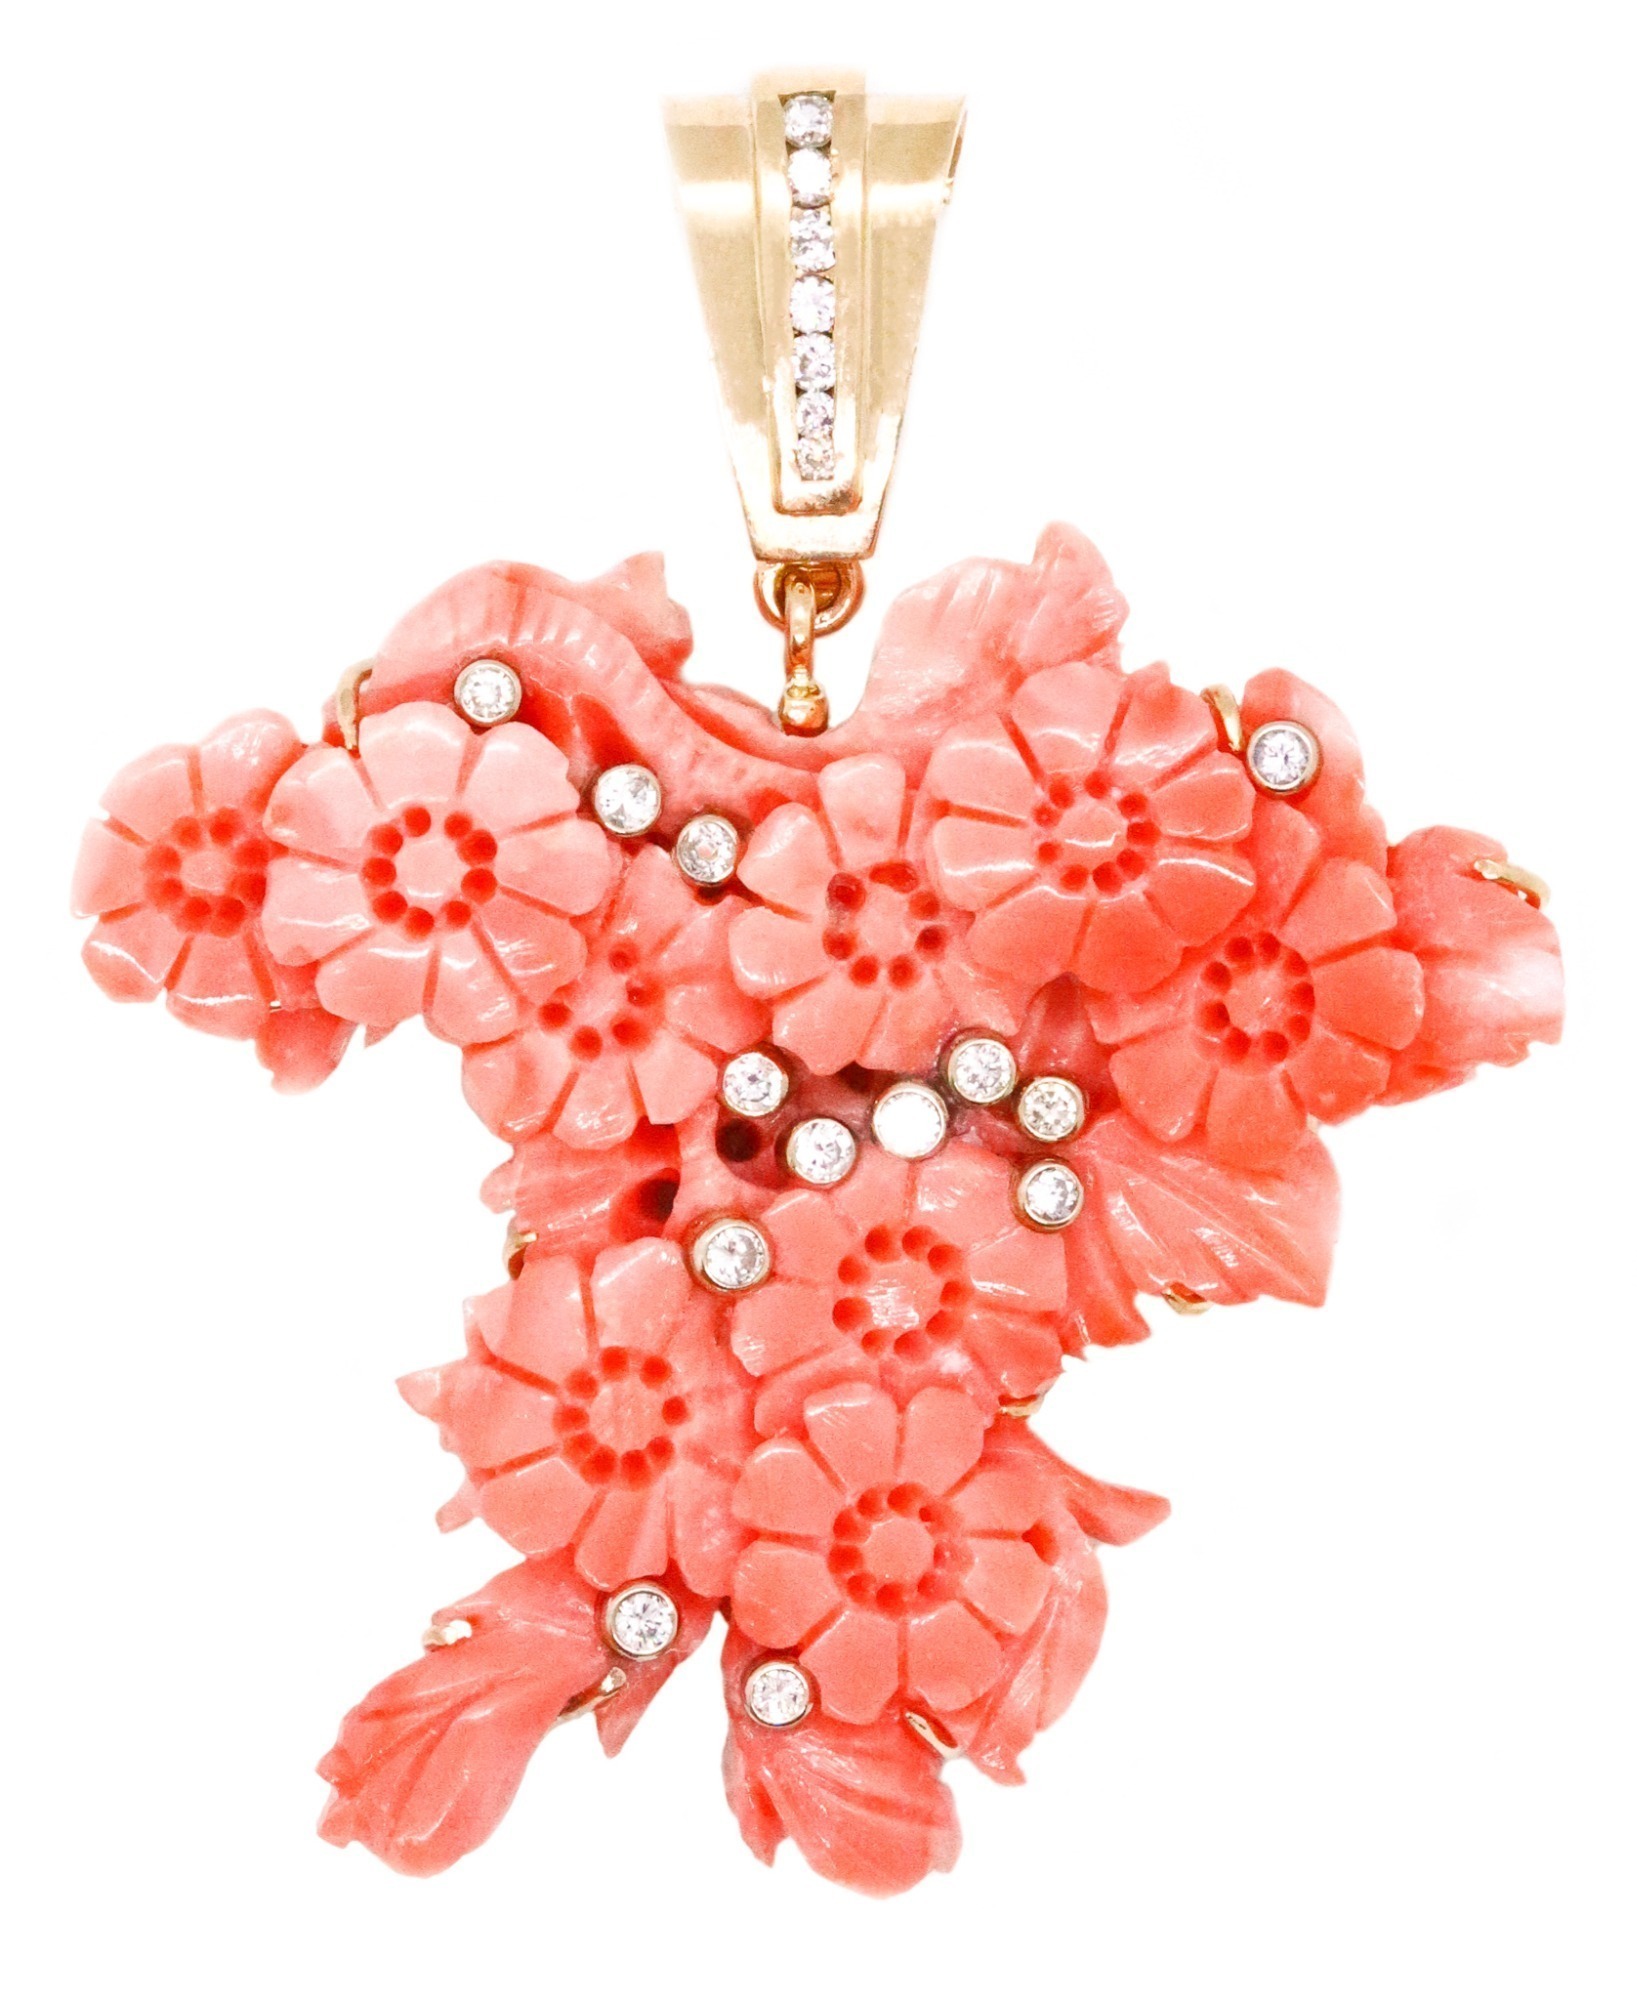 14K GOLD CARVED CORAL AND DIAMOND ORGANIC CLUSTER OF FLOWER PENDANT, CIRCA 1972